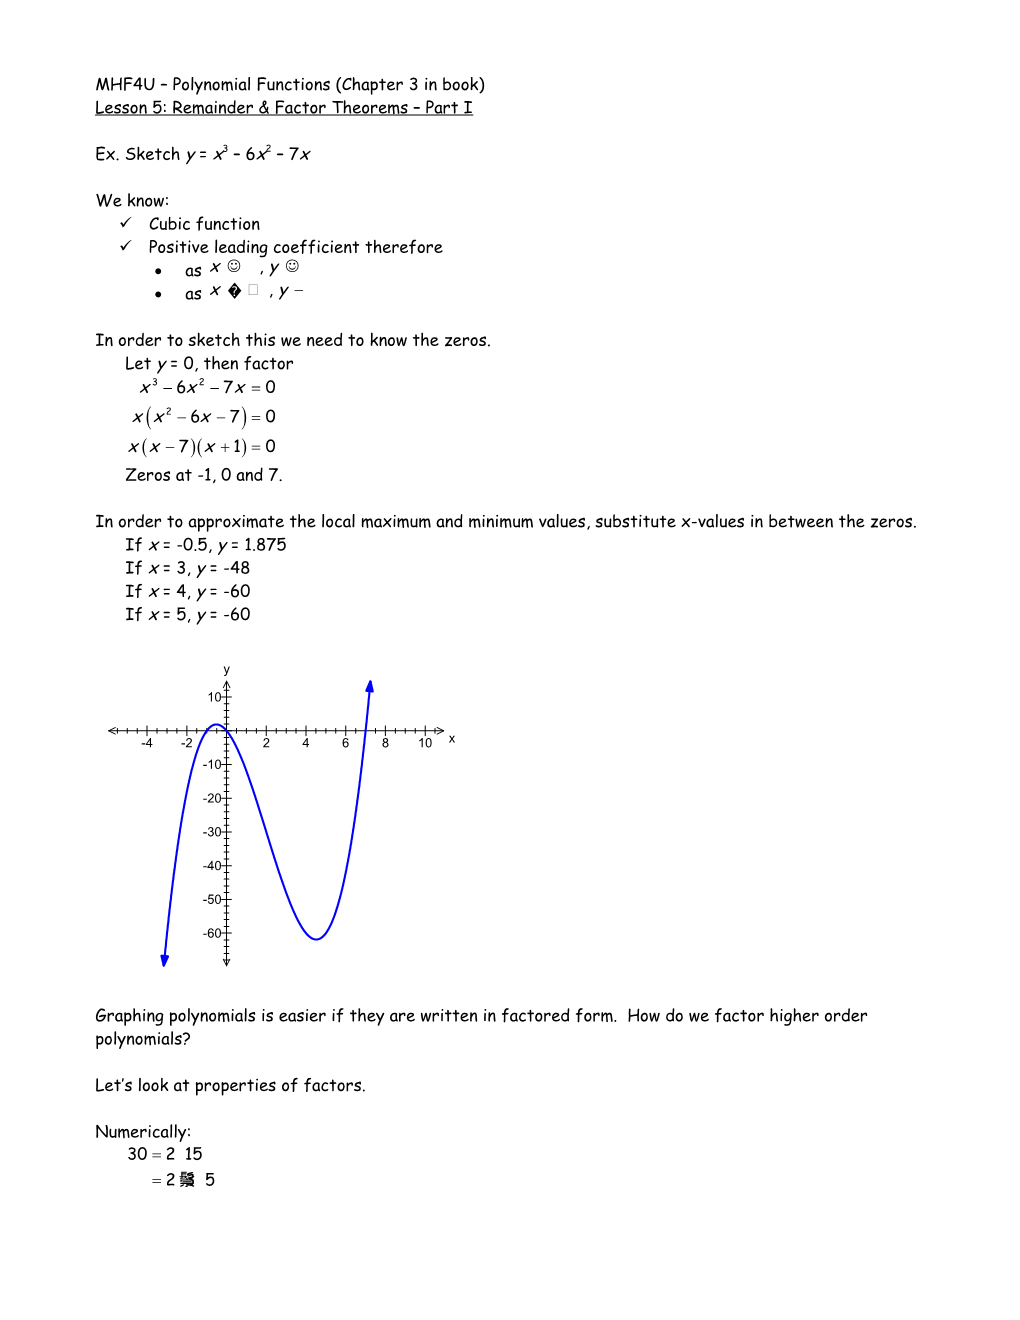 MHF4U Unit 2: Polynomial Functions (Chapter 3 in Book)